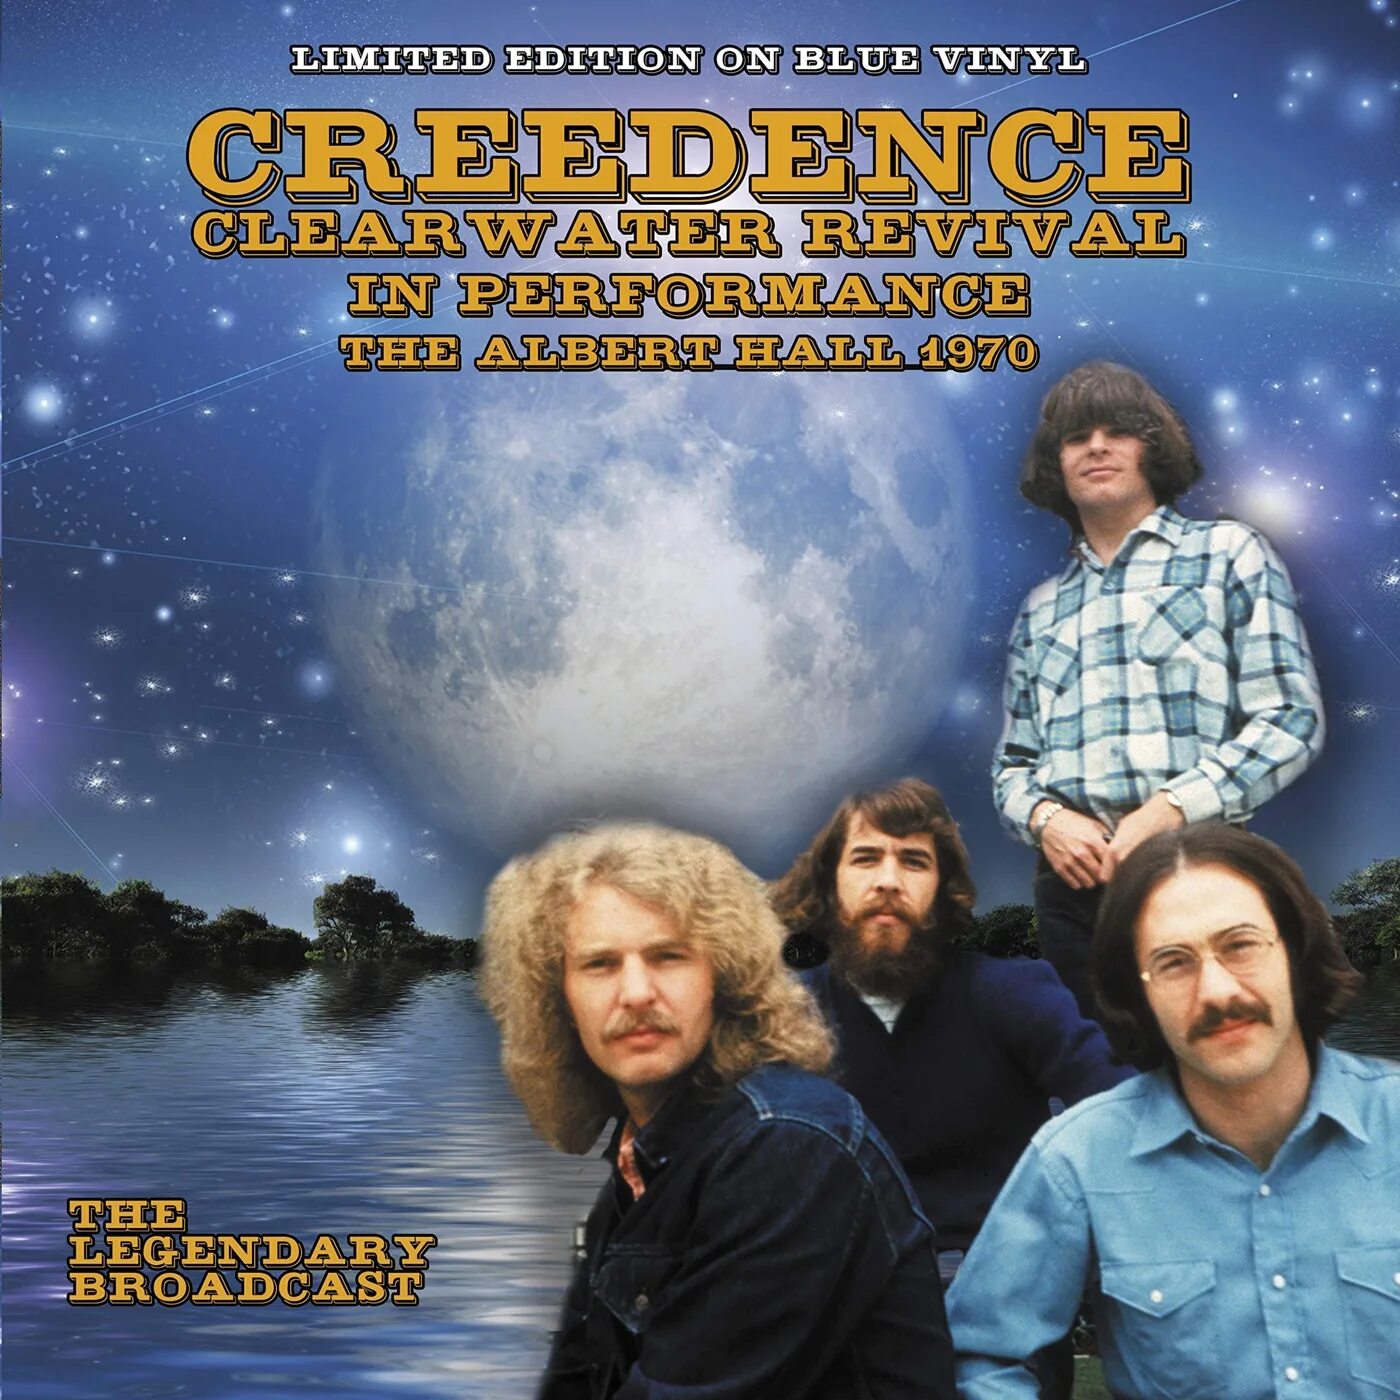 Creedence Clearwater Revival 1972. Группа Криденс. Группа Creedence Clearwater Revival альбомы. Creedence clearwater rain